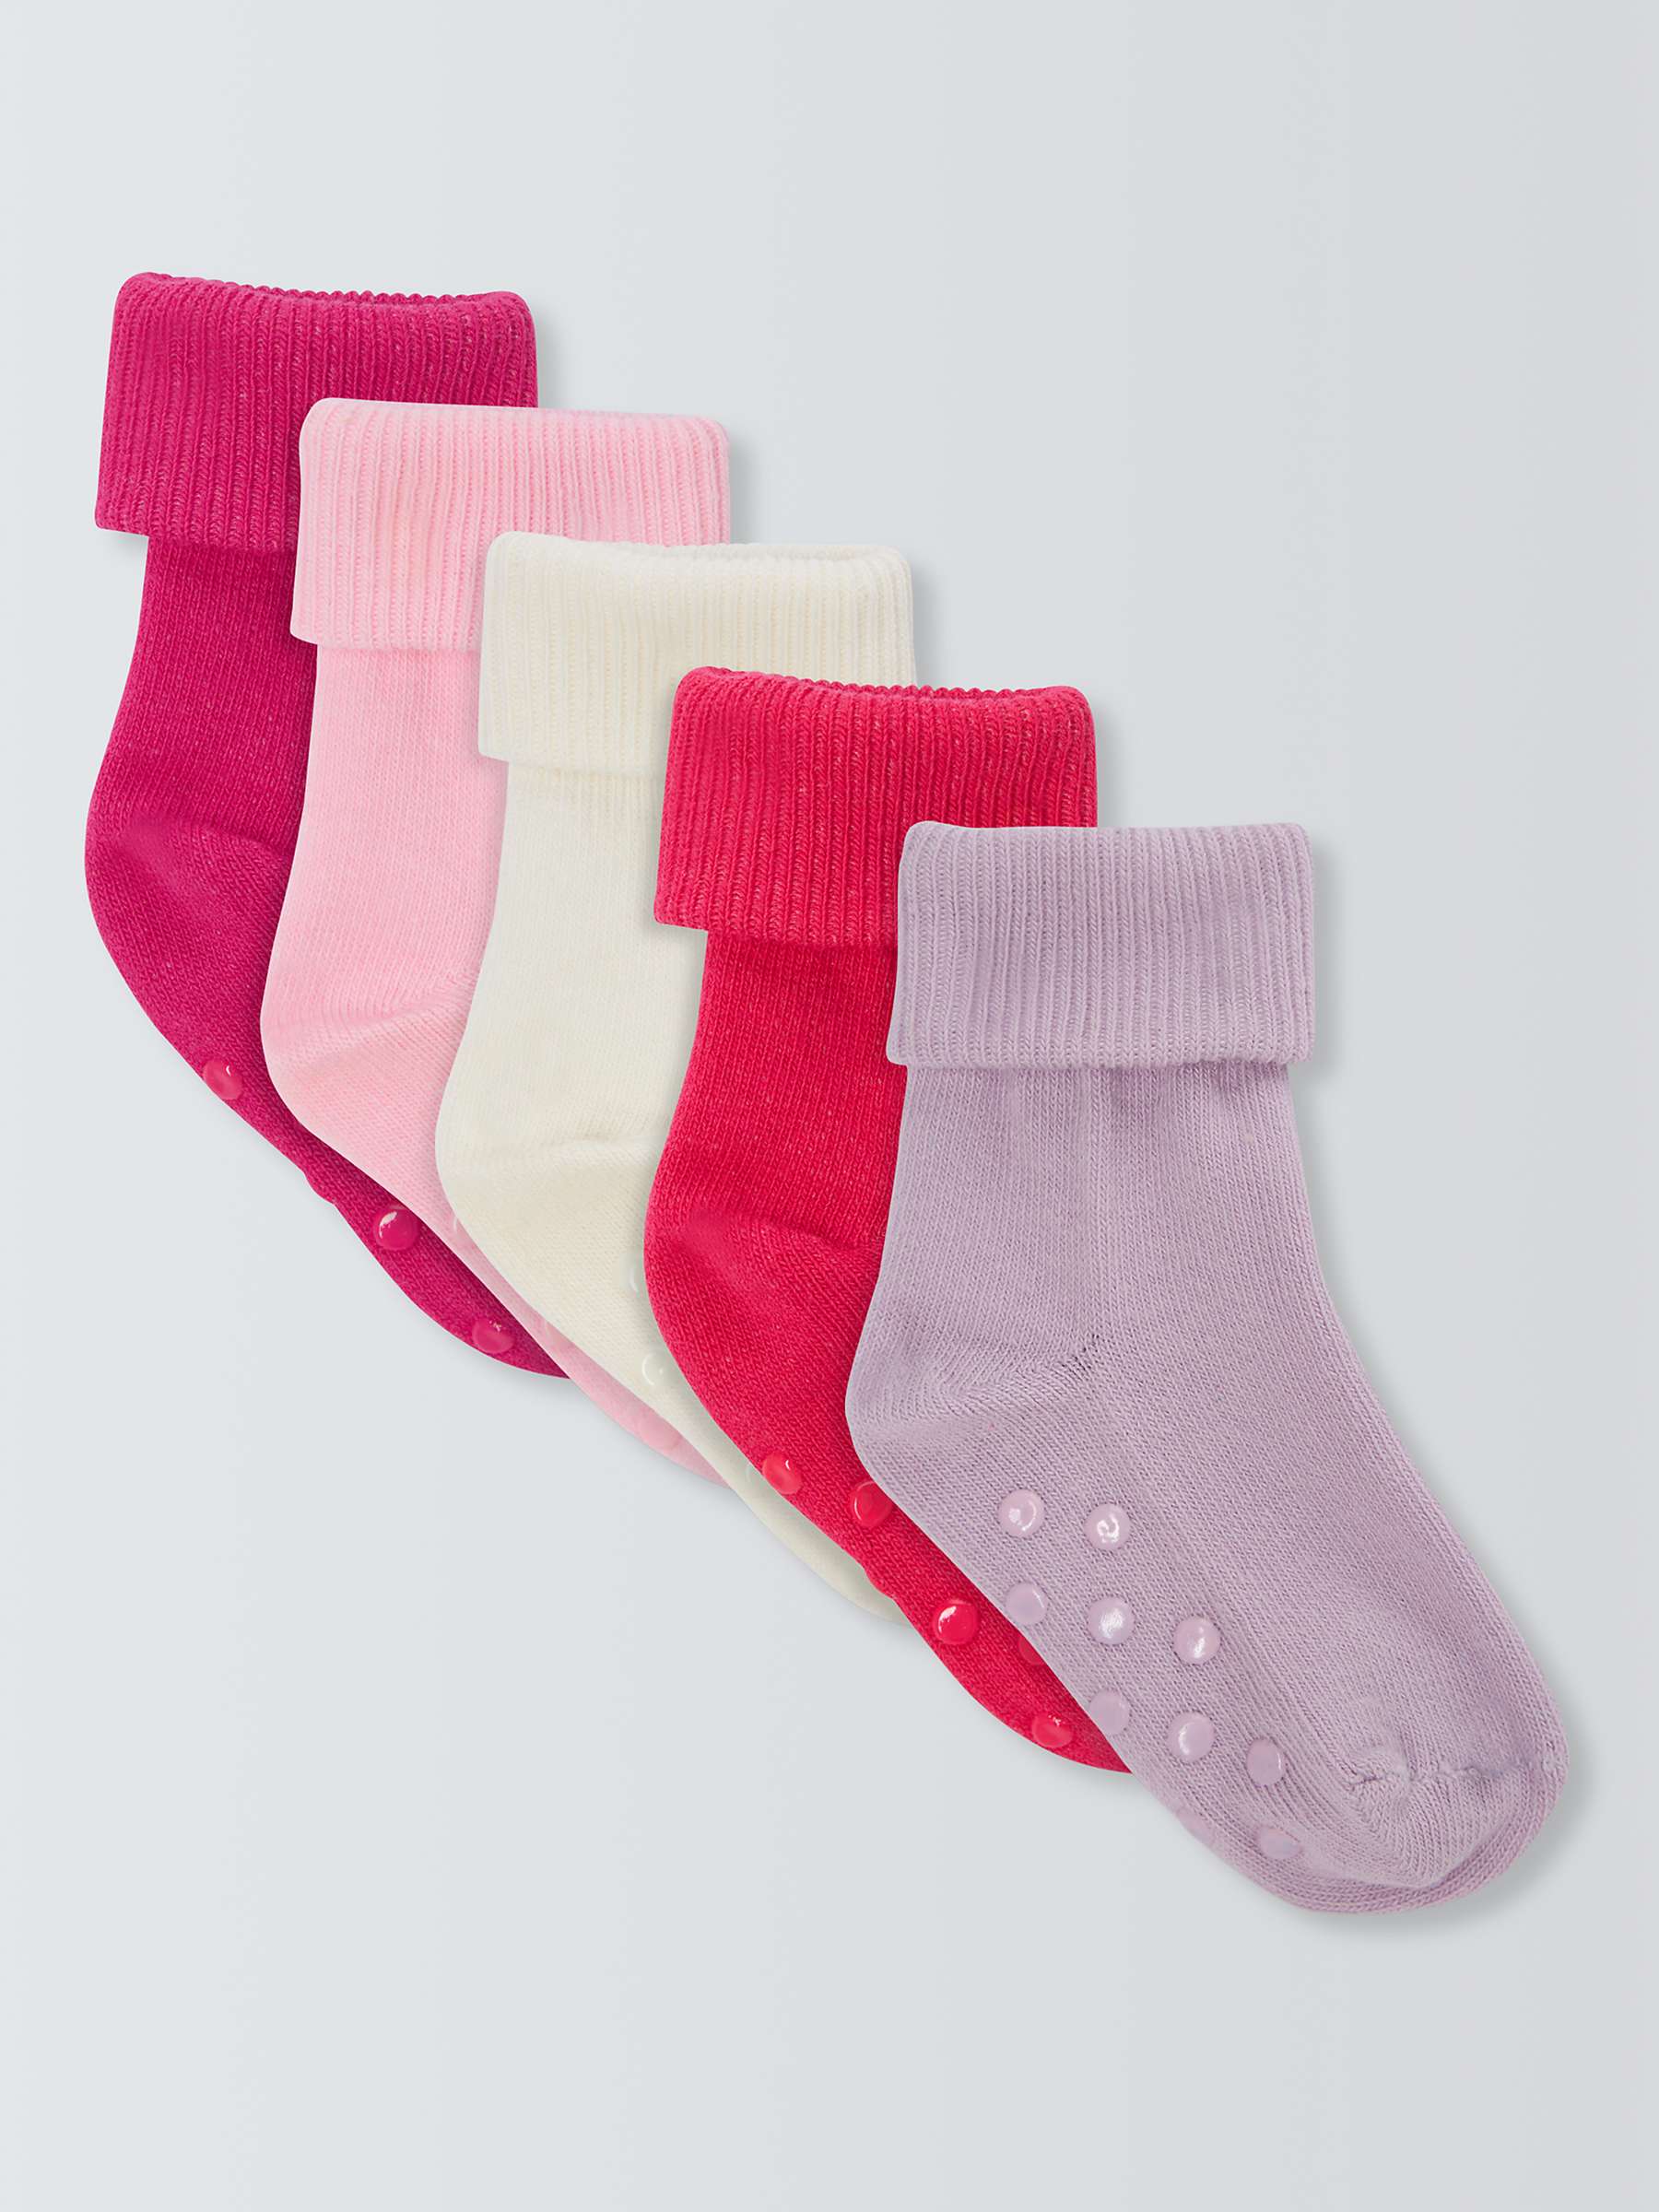 Buy John Lewis Baby Organic Cotton Rich Roll Top Socks, Pack of 5 Online at johnlewis.com